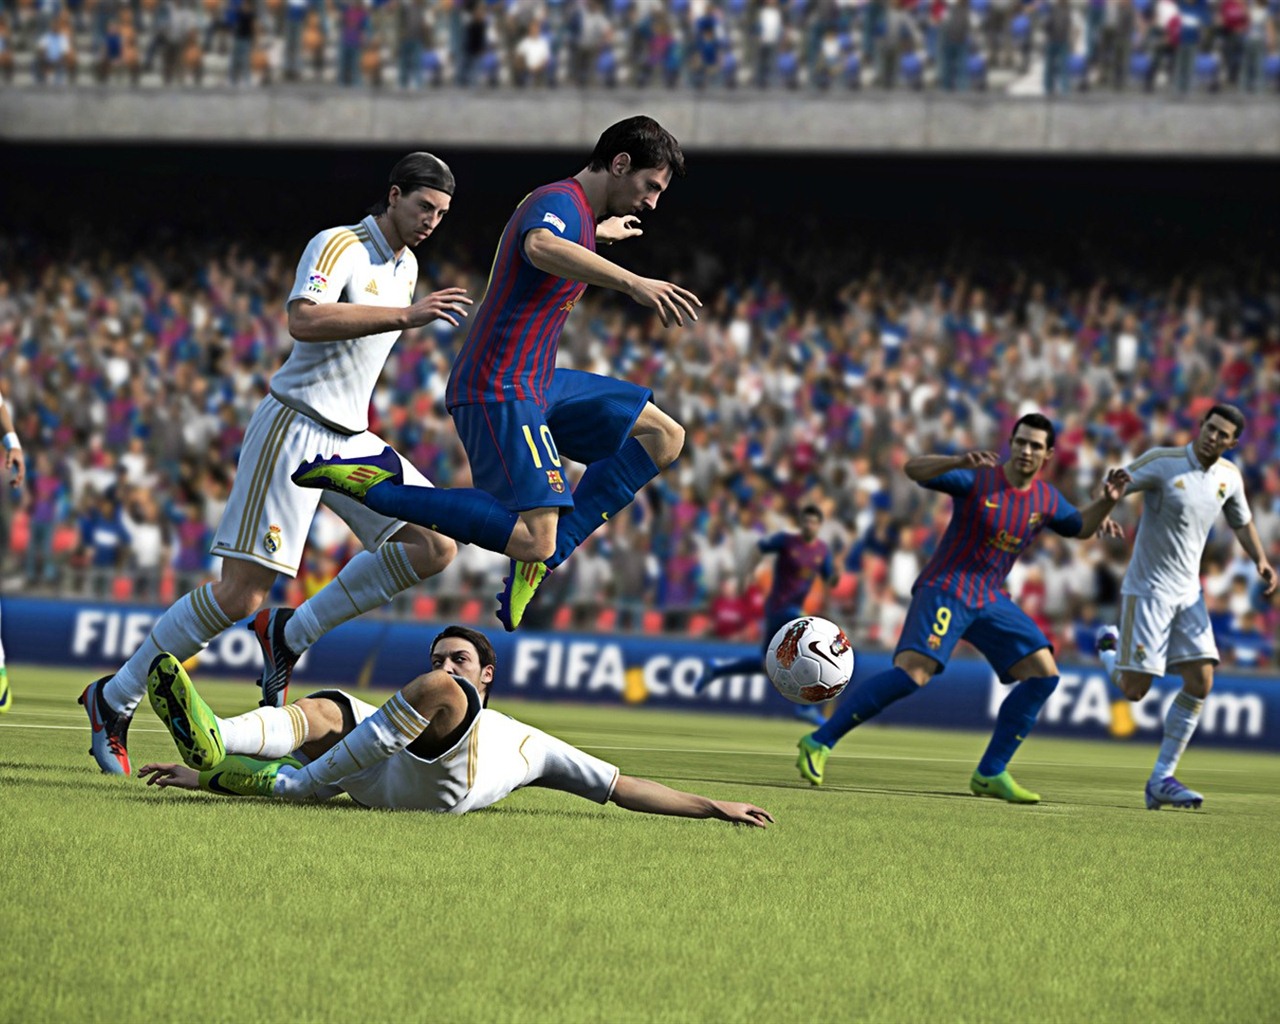 FIFA 13 game HD wallpapers #4 - 1280x1024